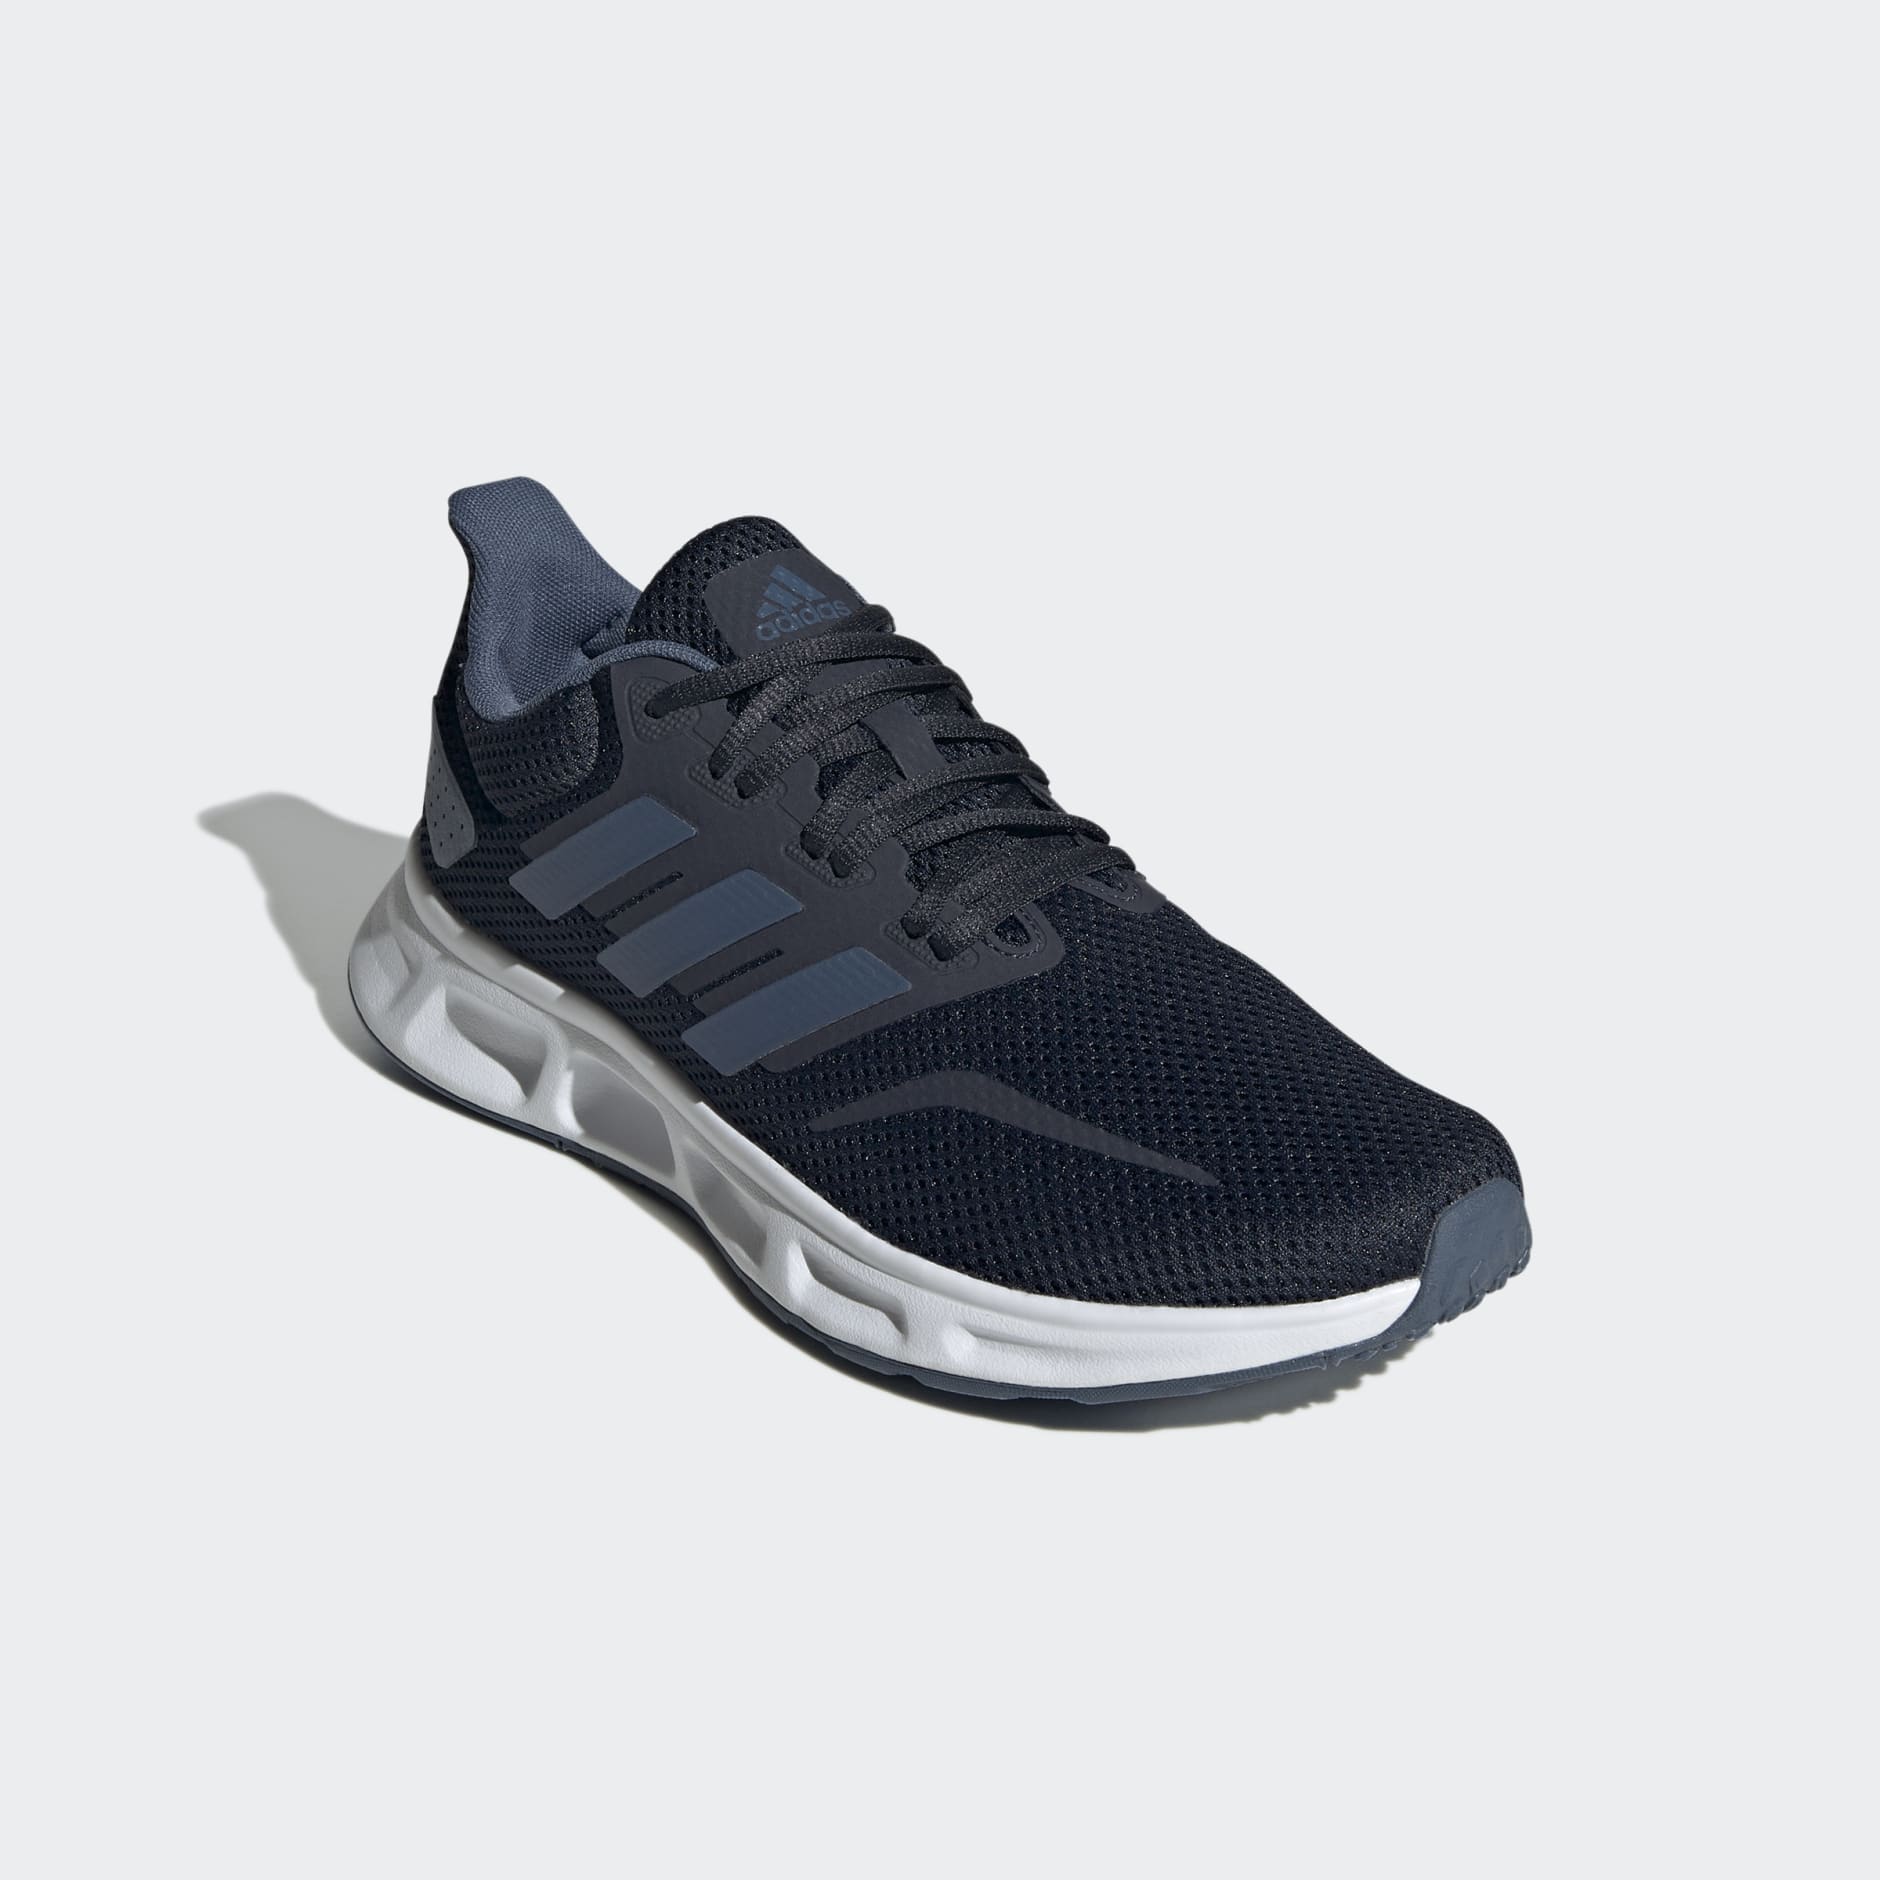 Adidas Showtheway 2.0 Shoes